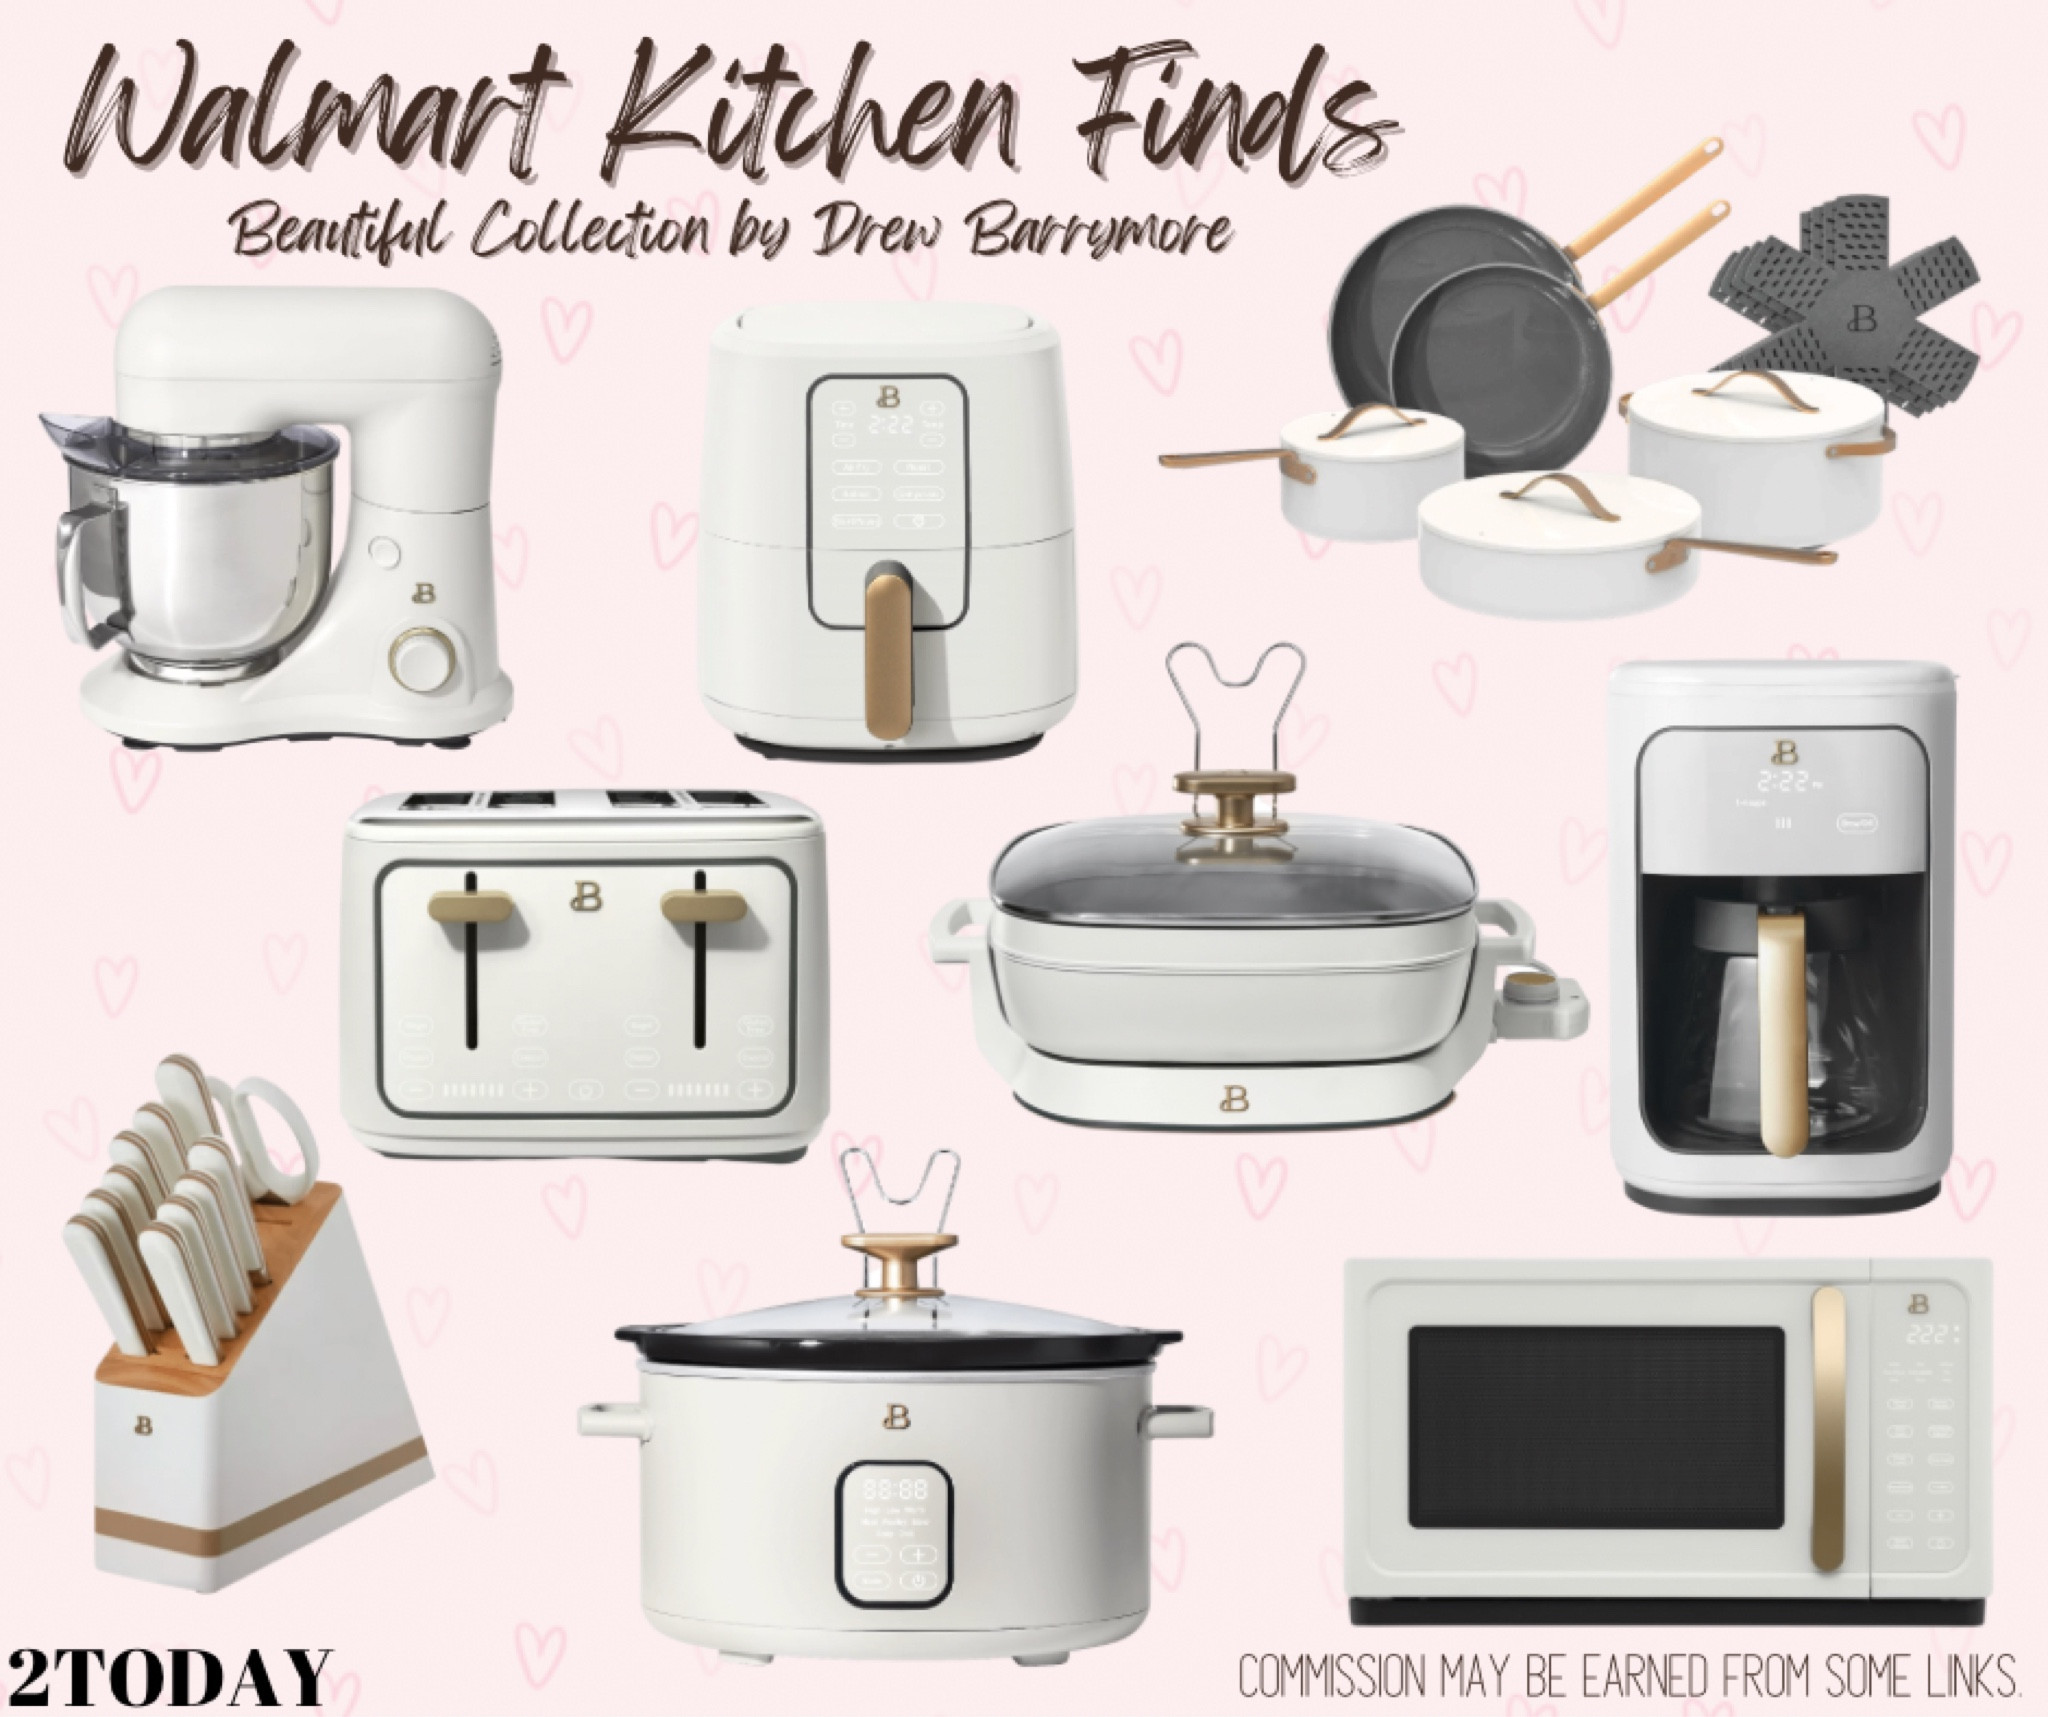 Drew Barrymore's new 'Beautiful' kitchen line is truly so chic